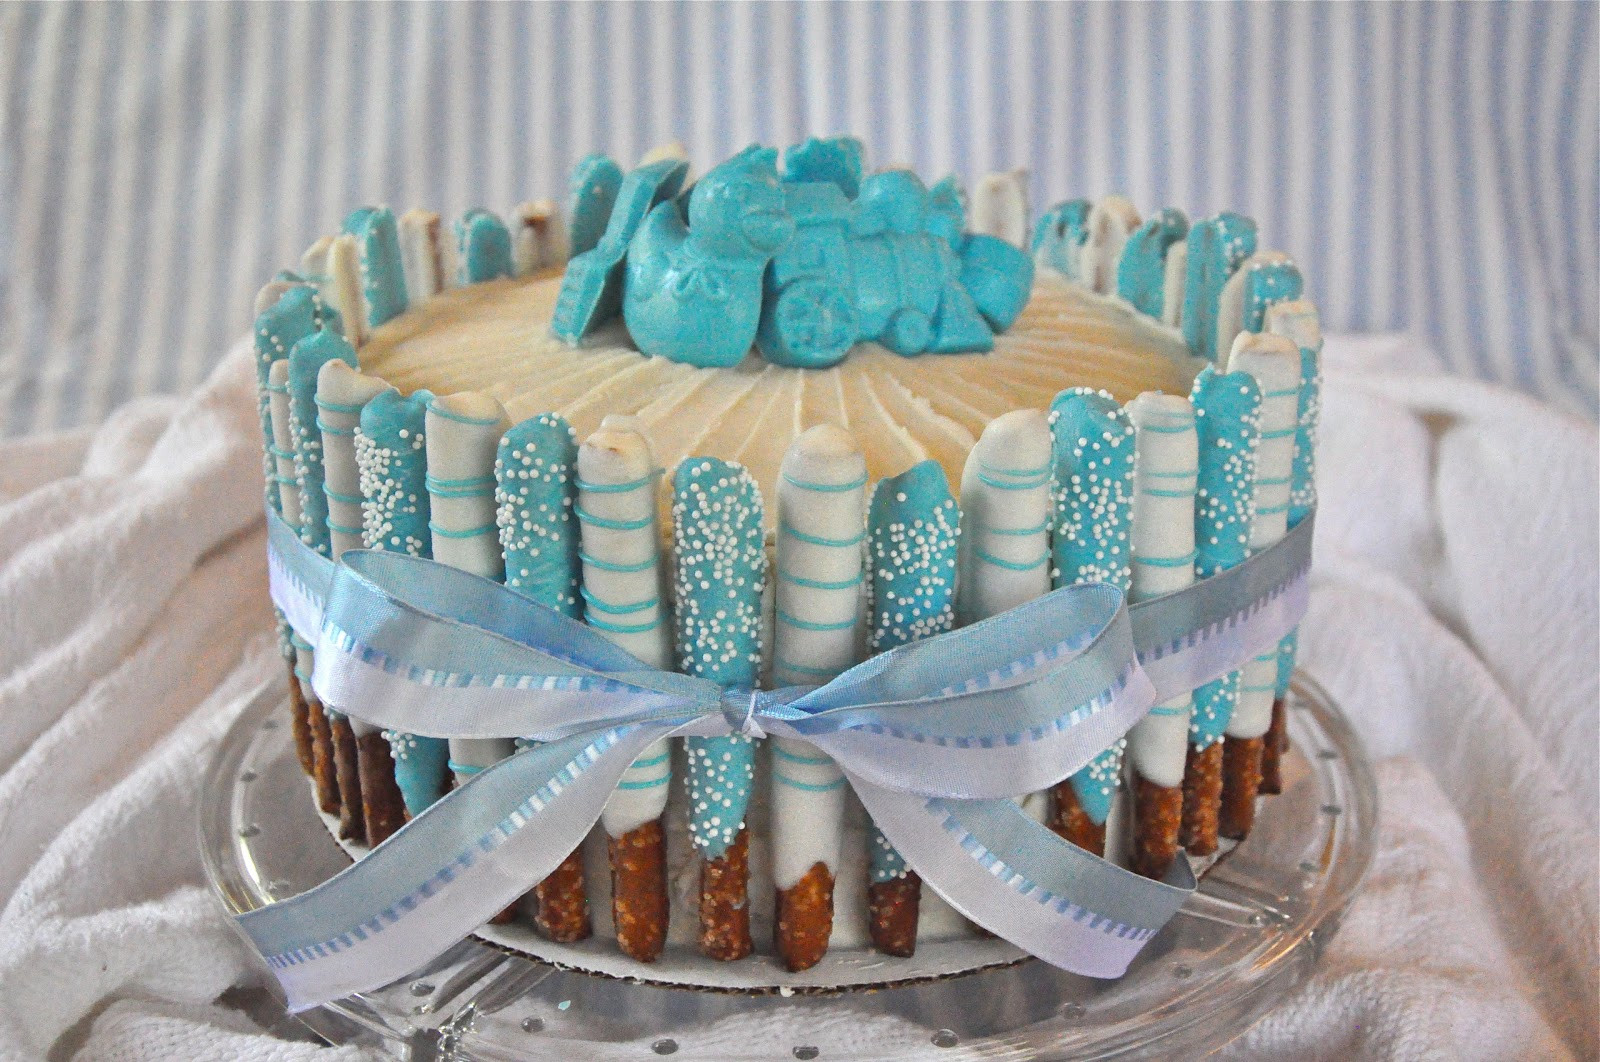 Easy Cake Decorating Ideas For Baby Shower
 I think I could do that Blue Baby Boy Shower Cake